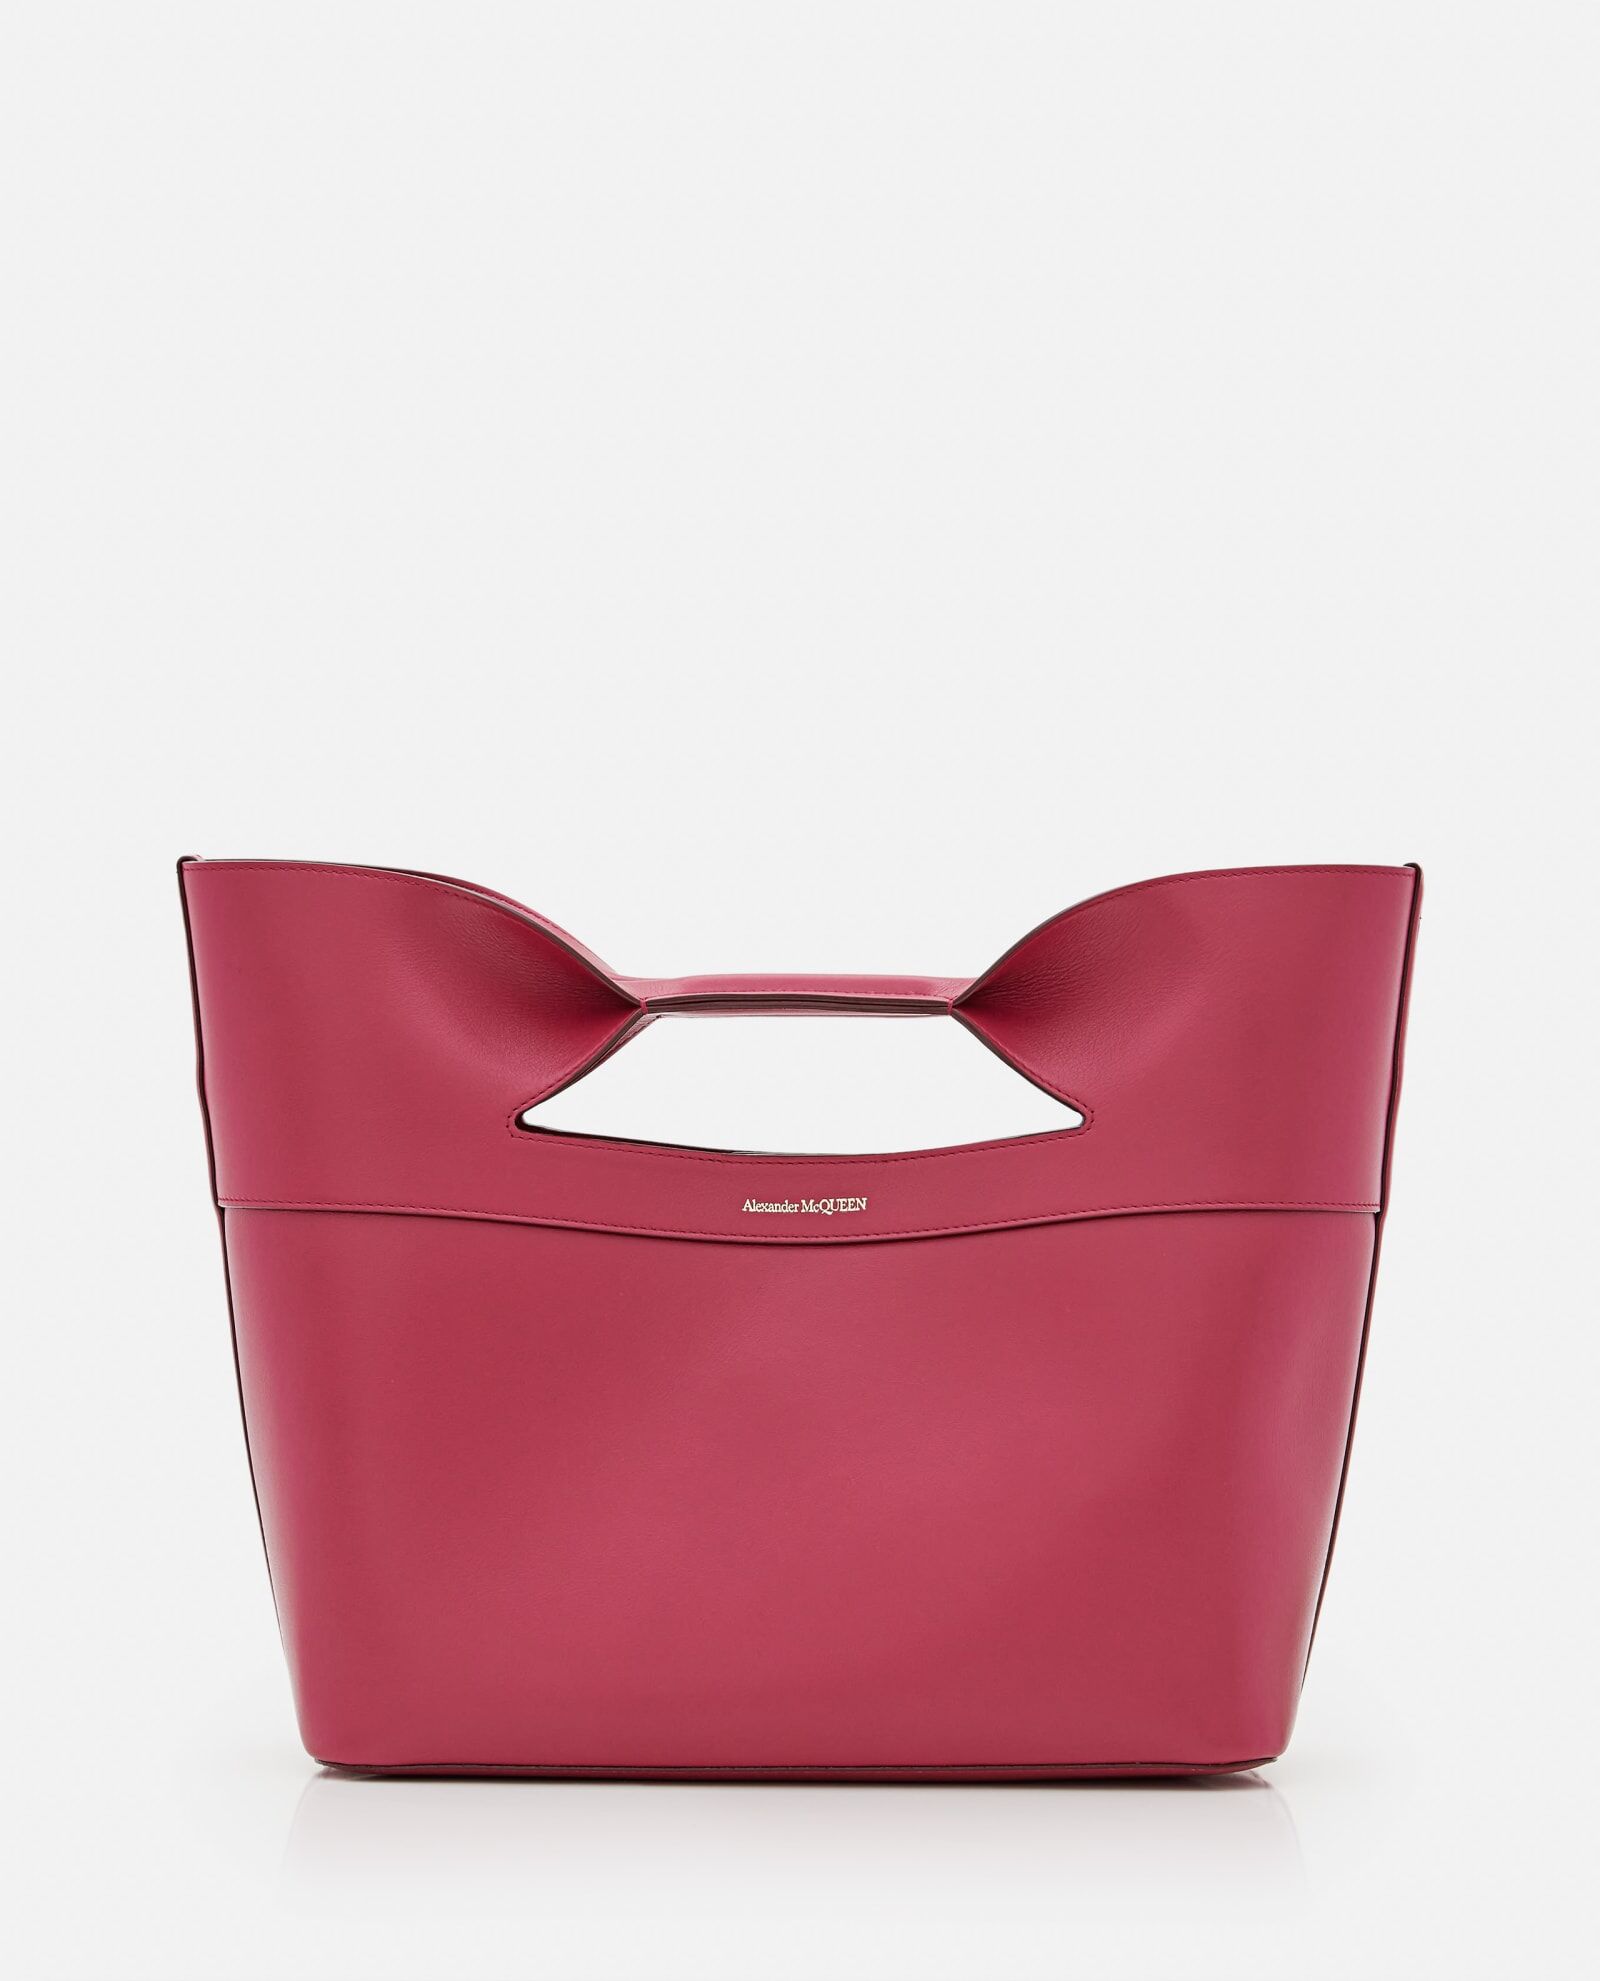 Alexander McQueen The Bow Small Leather Tote Bag - Red - female - Size: 0one size